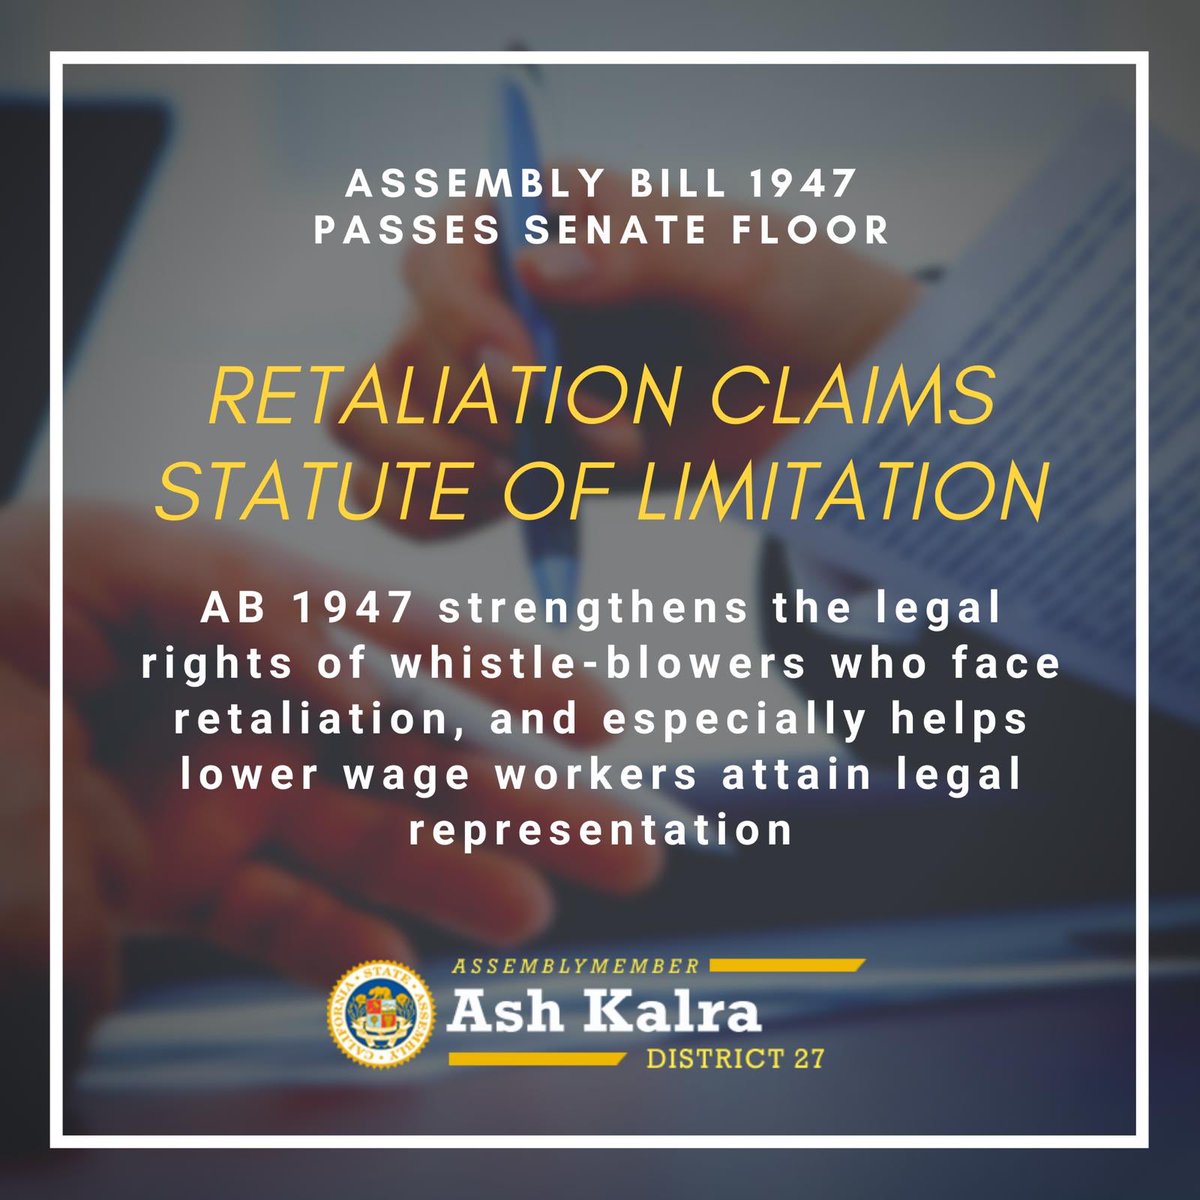 Grateful to Senate for passing my #AB1947 which strengthens legal rights of whistleblowers who face retaliation by extending statue of limitations to file claims & helps workers get legal representation. Thanks @SenatorLeyva for presenting bill! It’s heading to Governor’s desk!